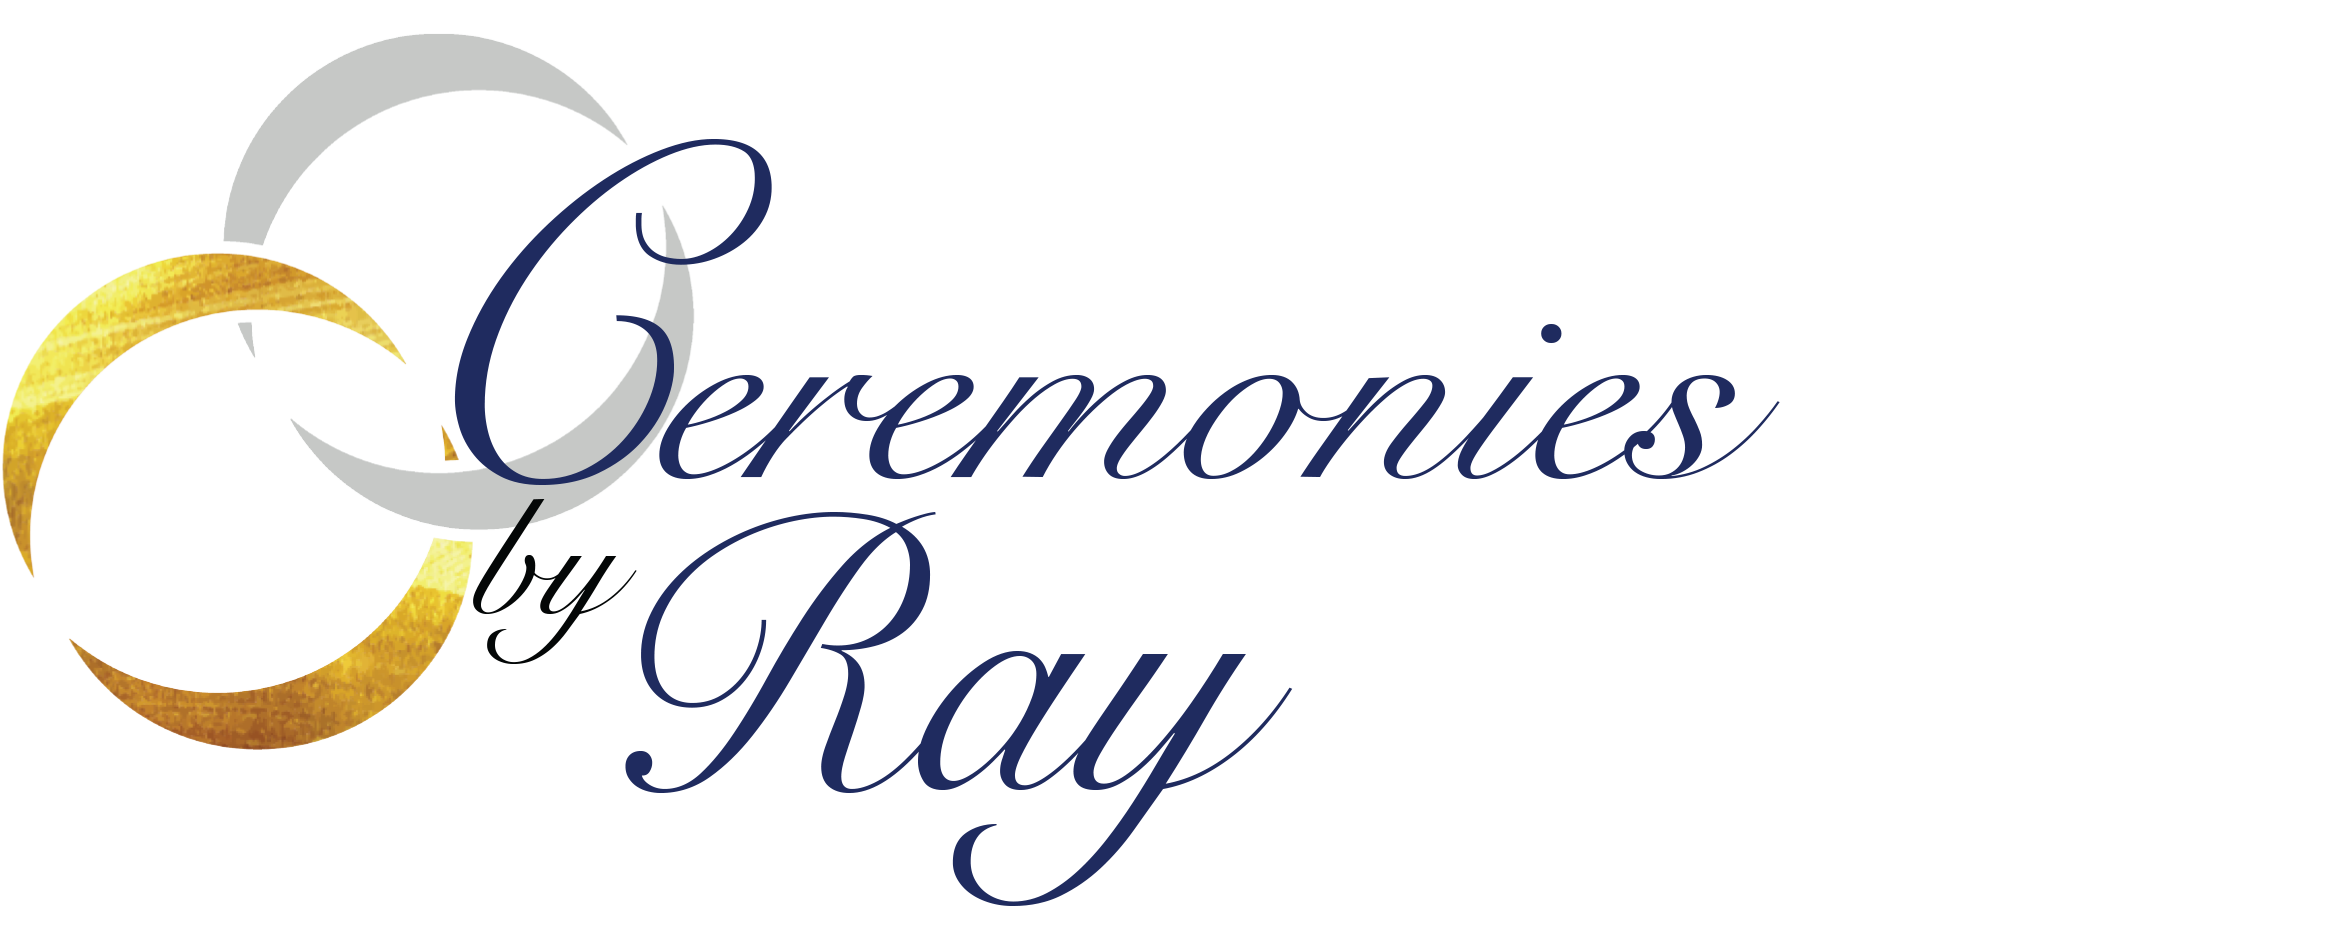 Ceremonies by Ray